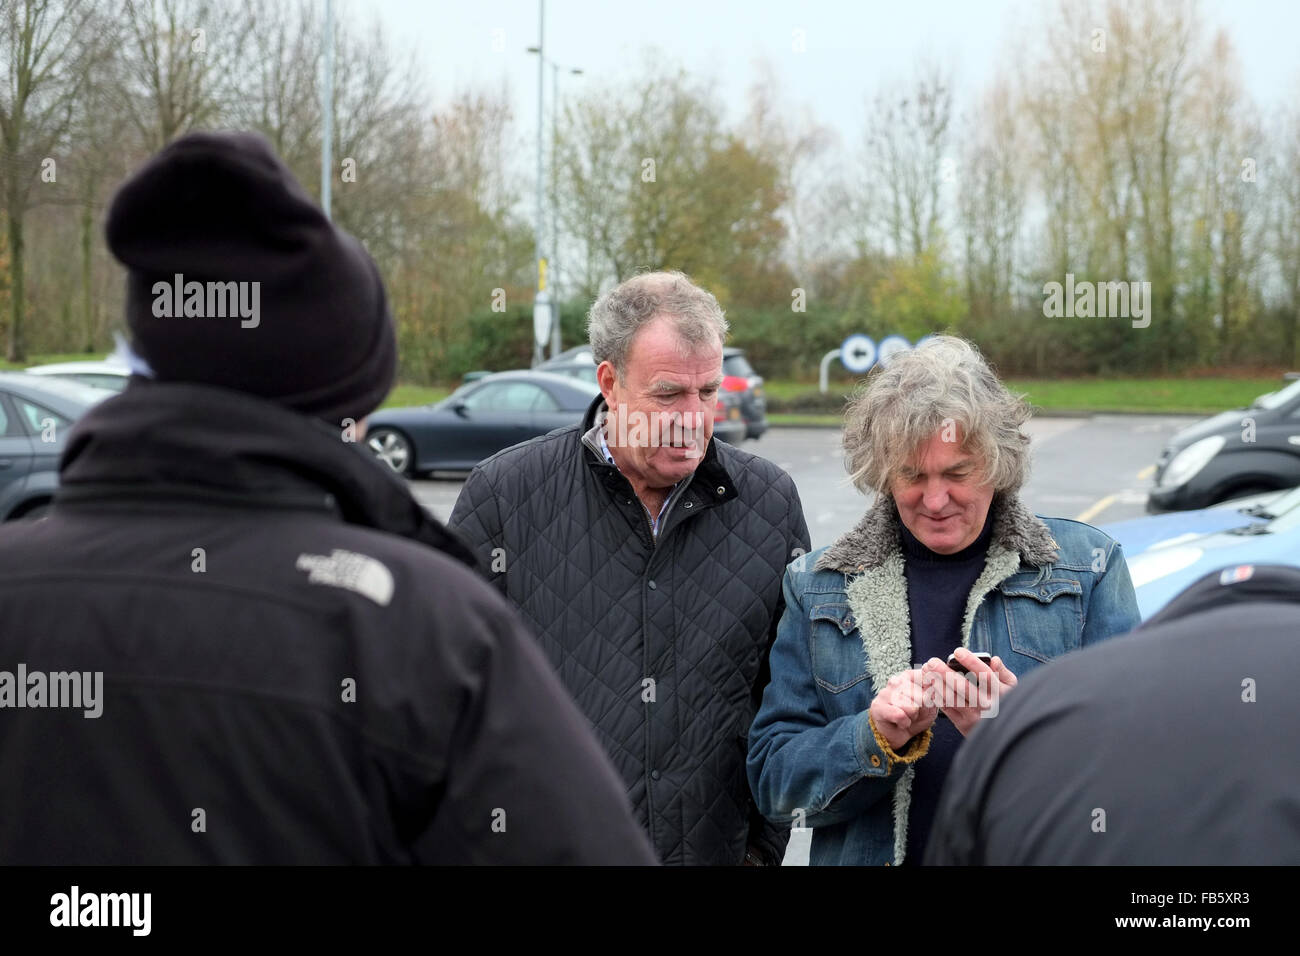 Jeremy Clarkson & James May filming at Reading Service Station, England, on 24th November 2015, for their new Amazon Prime show. Stock Photo